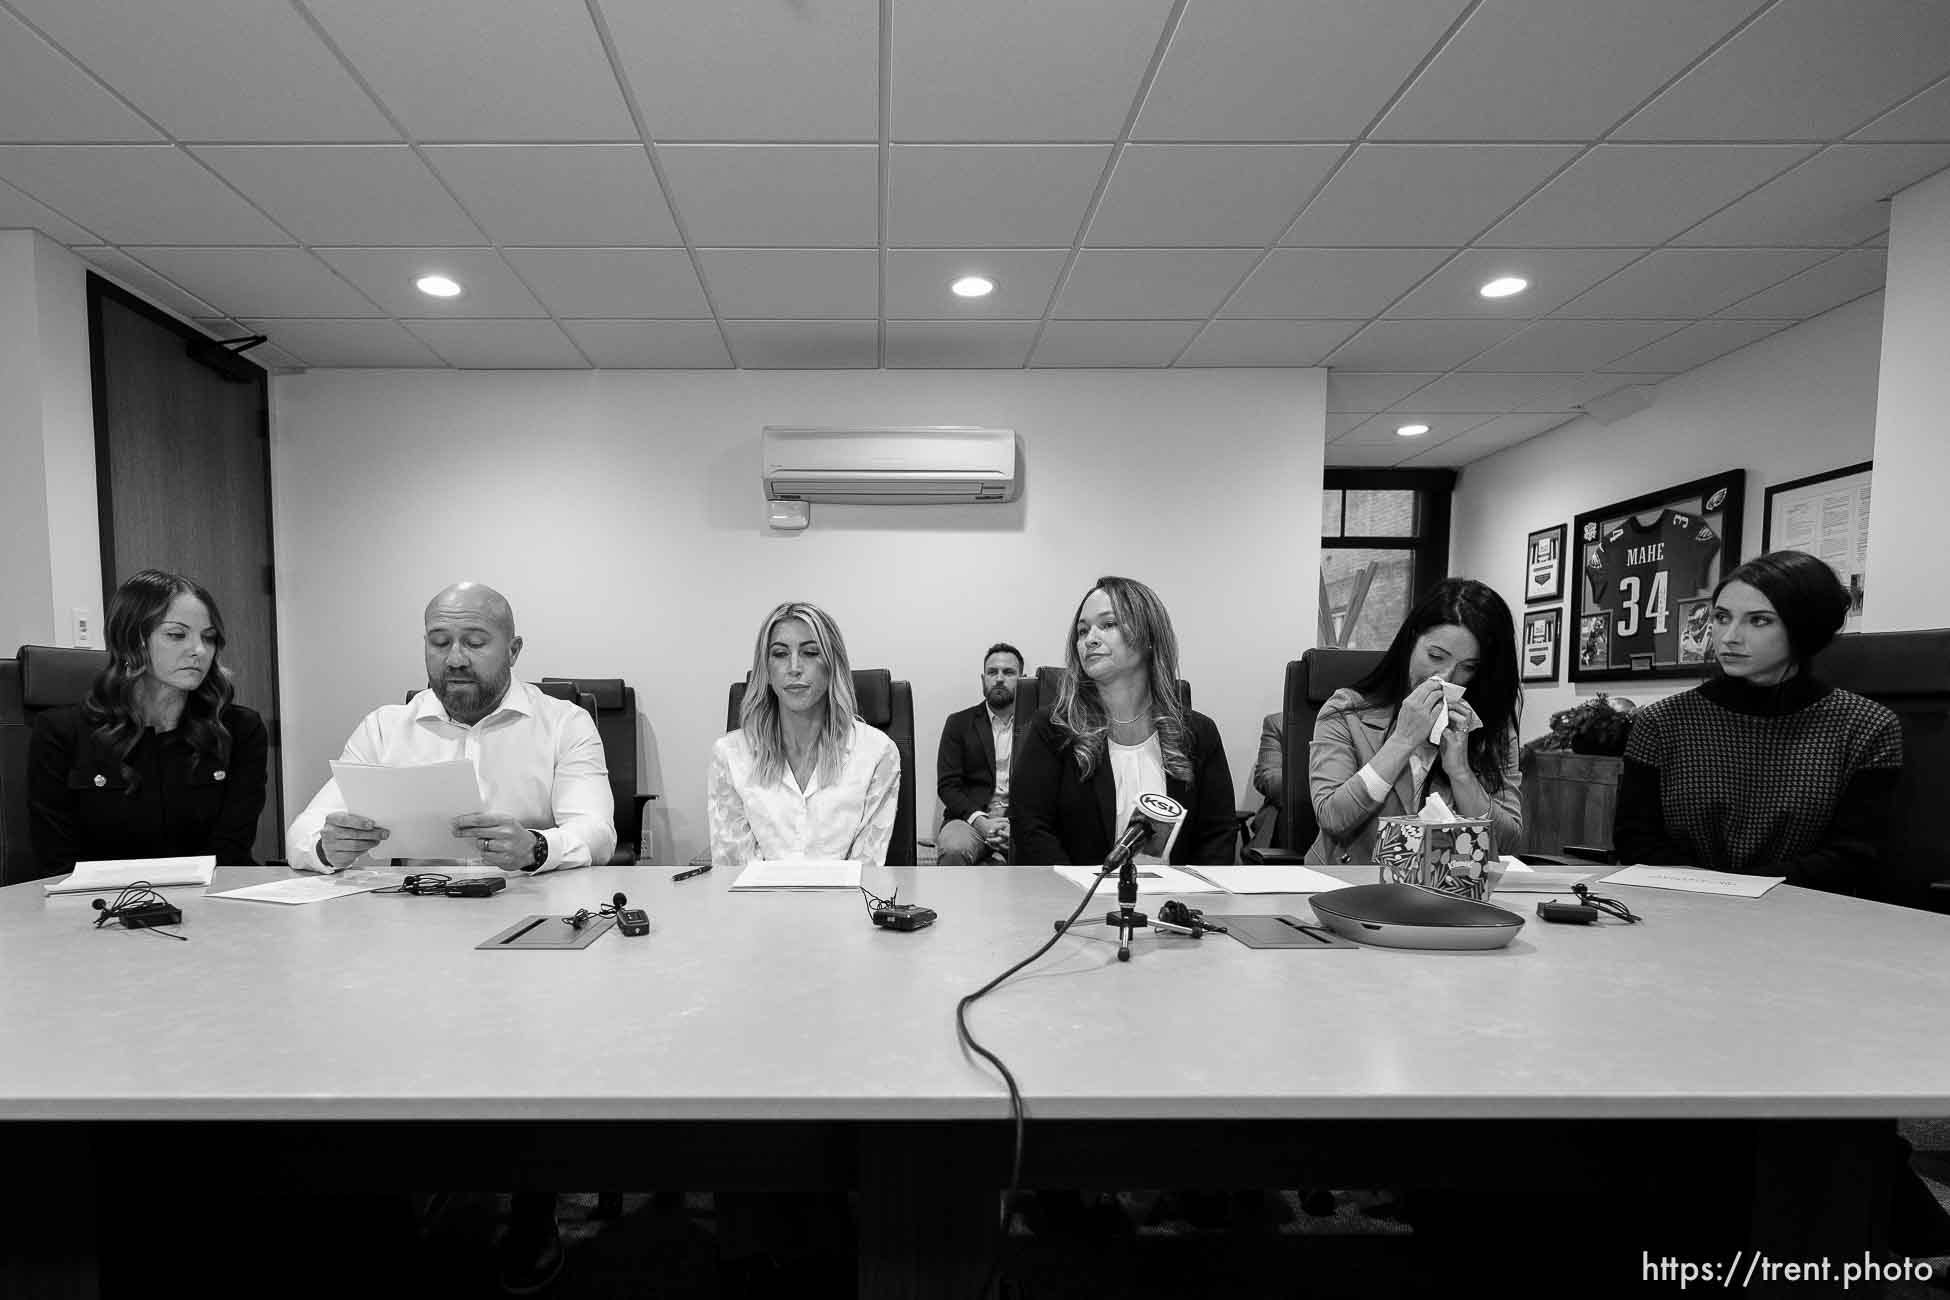 (Trent Nelson  |  The Salt Lake Tribune) Women who are accusing Tim Ballard of sexual misconduct speak at a news conference in Salt Lake City on Tuesday, Nov. 21, 2023. From left are Celeste Borys, Mike Borys, Kira Lynch, Jordana (Bree) Righter, Sashleigha (Sasha) Hightower and Mary Hall.